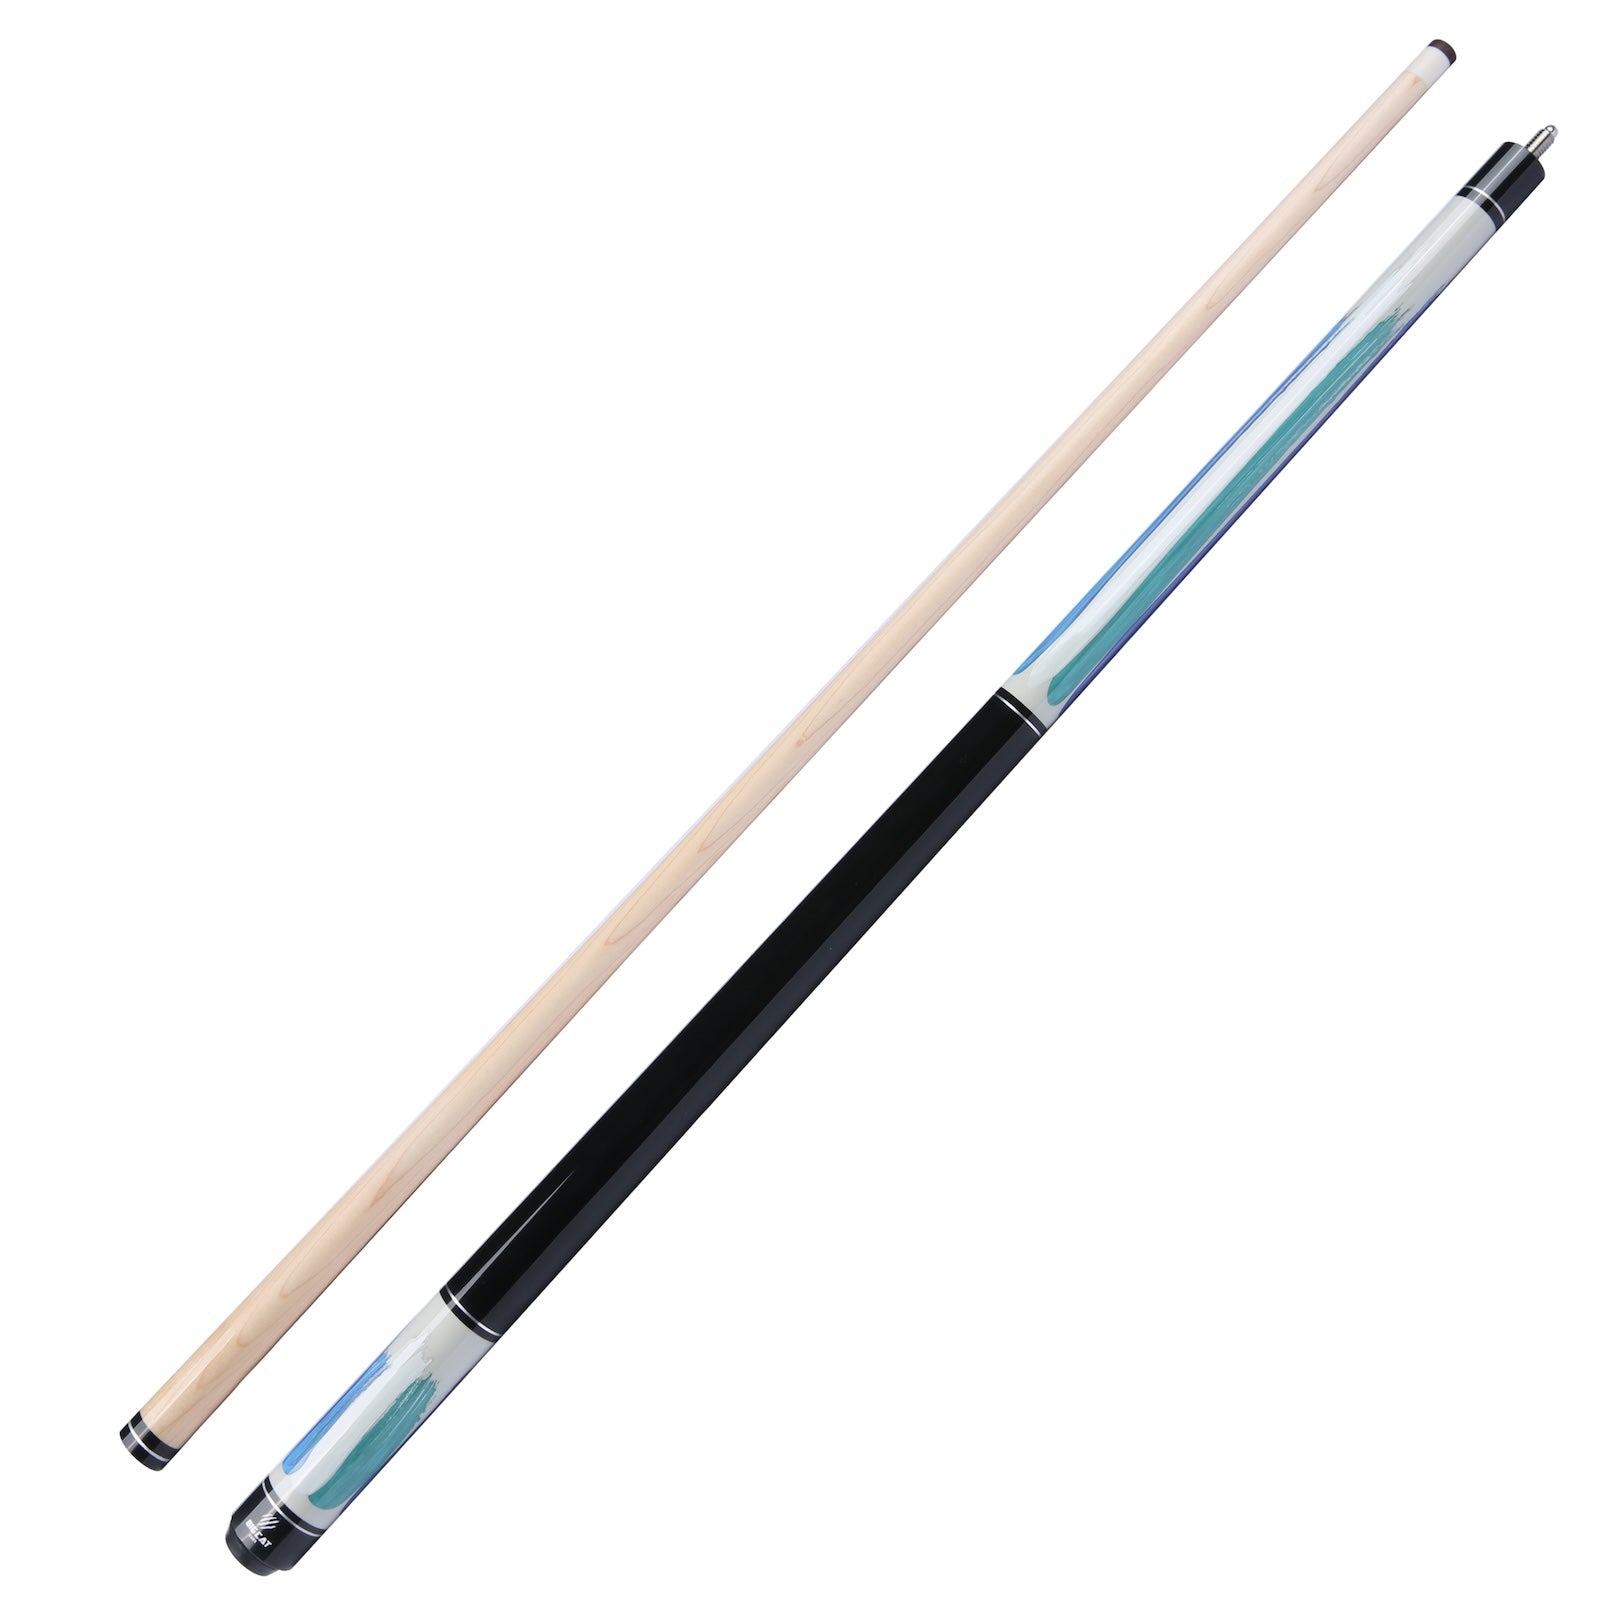 Big Cat Paint VII Dynamite Black Pool Cue Stick - 18/19/20/21 oz, Big Cat Professional Leather tip, 12.5mm, 58" Length, Professional Players, Ideal for Home or Commercial/Bar Settings, Premium Quality Grade A Canadian Maple